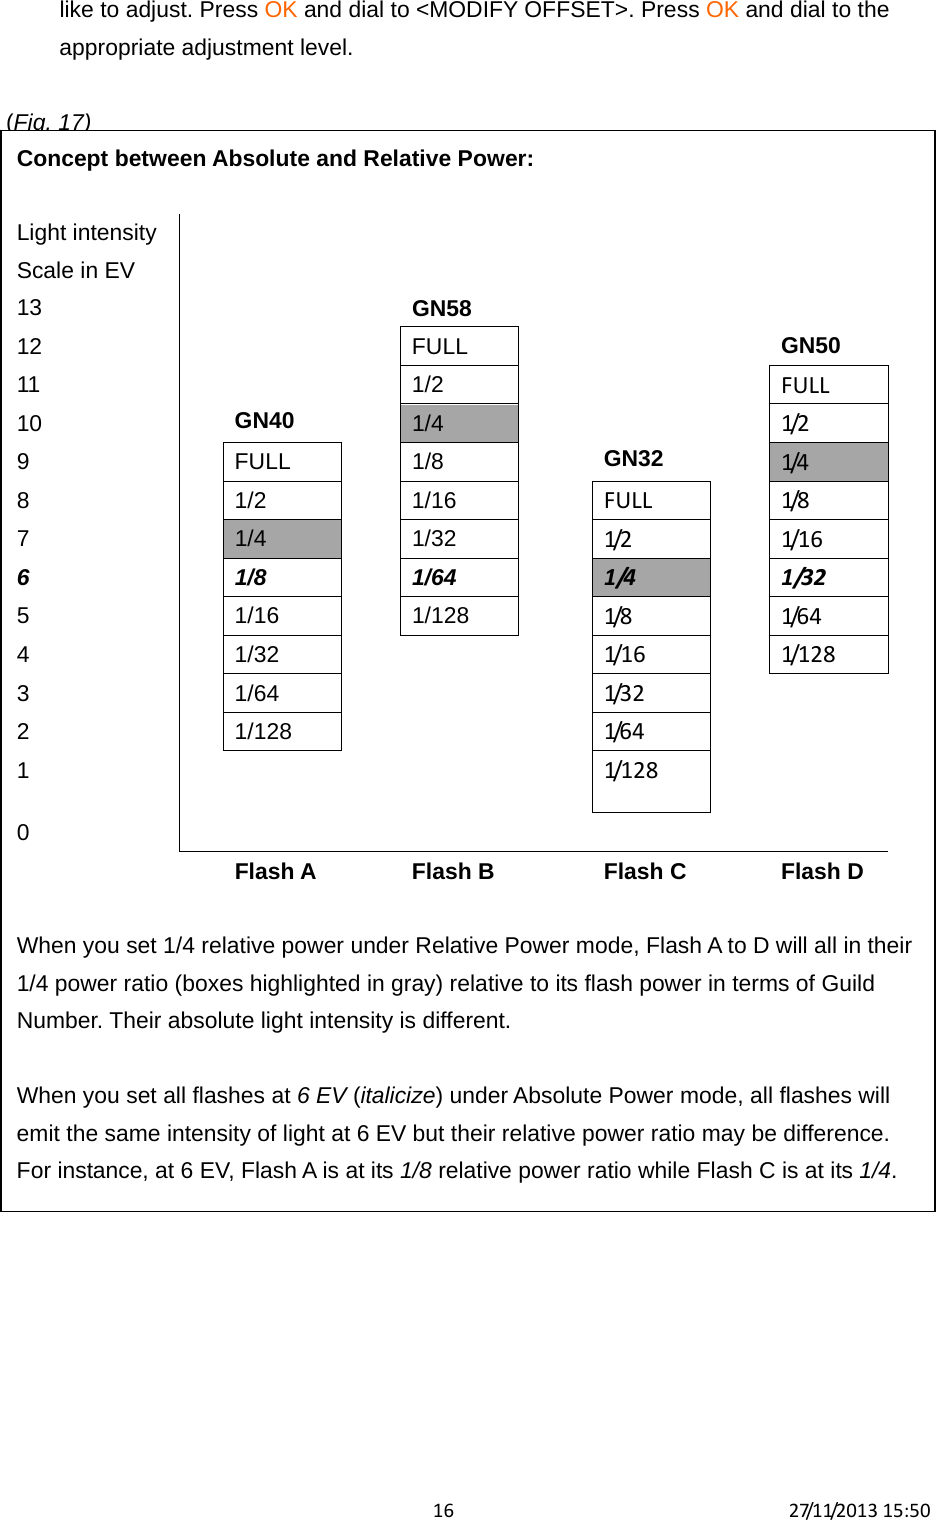 1627/11/201315:50like to adjust. Press OK and dial to &lt;MODIFY OFFSET&gt;. Press OK and dial to the appropriate adjustment level.  (Fig. 17)                               Concept between Absolute and Relative Power:                                                                                   Light intensity Scale in EV         13      GN40  GN58       GN32   GN50 12 FULL 11 1/2 FULL 10  1/4  1/2  9 FULL 1/8  1/4  8 1/2 1/16 FULL 1/8  7  1/4 1/32 1/2  1/1 6  6  1/8  1/64  1/4 1/32 5 1/16 1/128 1/8  1/6 4  4 1/32  1/1 6  1/128 3 1/64  1/3 2   2 1/128  1/6 4  1   1/128 0       Flash A    Flash B    Flash C    Flash D  When you set 1/4 relative power under Relative Power mode, Flash A to D will all in their 1/4 power ratio (boxes highlighted in gray) relative to its flash power in terms of Guild Number. Their absolute light intensity is different.  When you set all flashes at 6 EV (italicize) under Absolute Power mode, all flashes will emit the same intensity of light at 6 EV but their relative power ratio may be difference. For instance, at 6 EV, Flash A is at its 1/8 relative power ratio while Flash C is at its 1/4.  